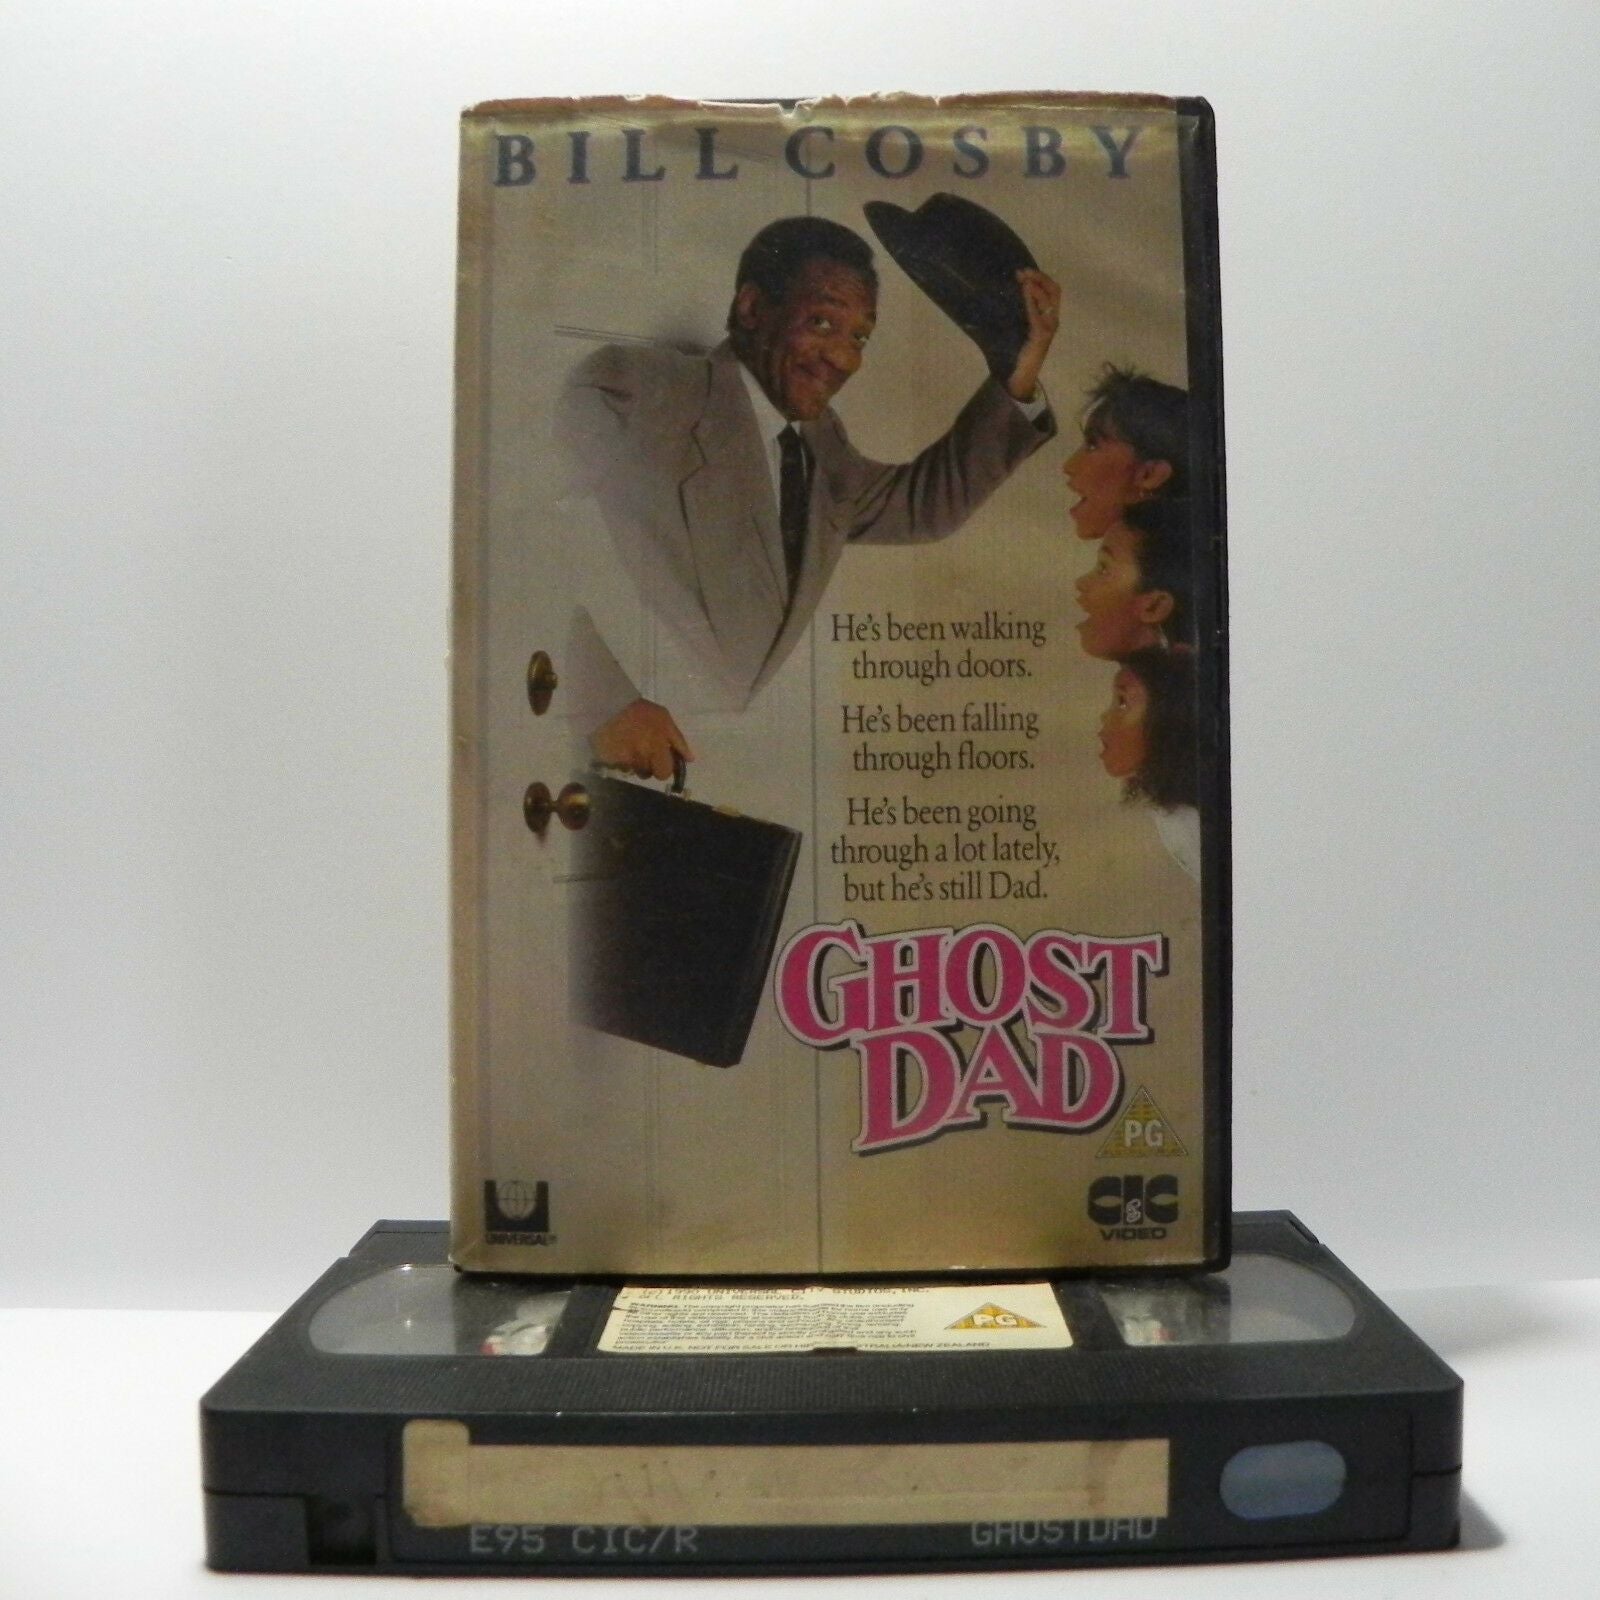 Ghost Dad: Bill Cosby - Large Box - (1990) Comedy Classic - Family Movie - VHS-